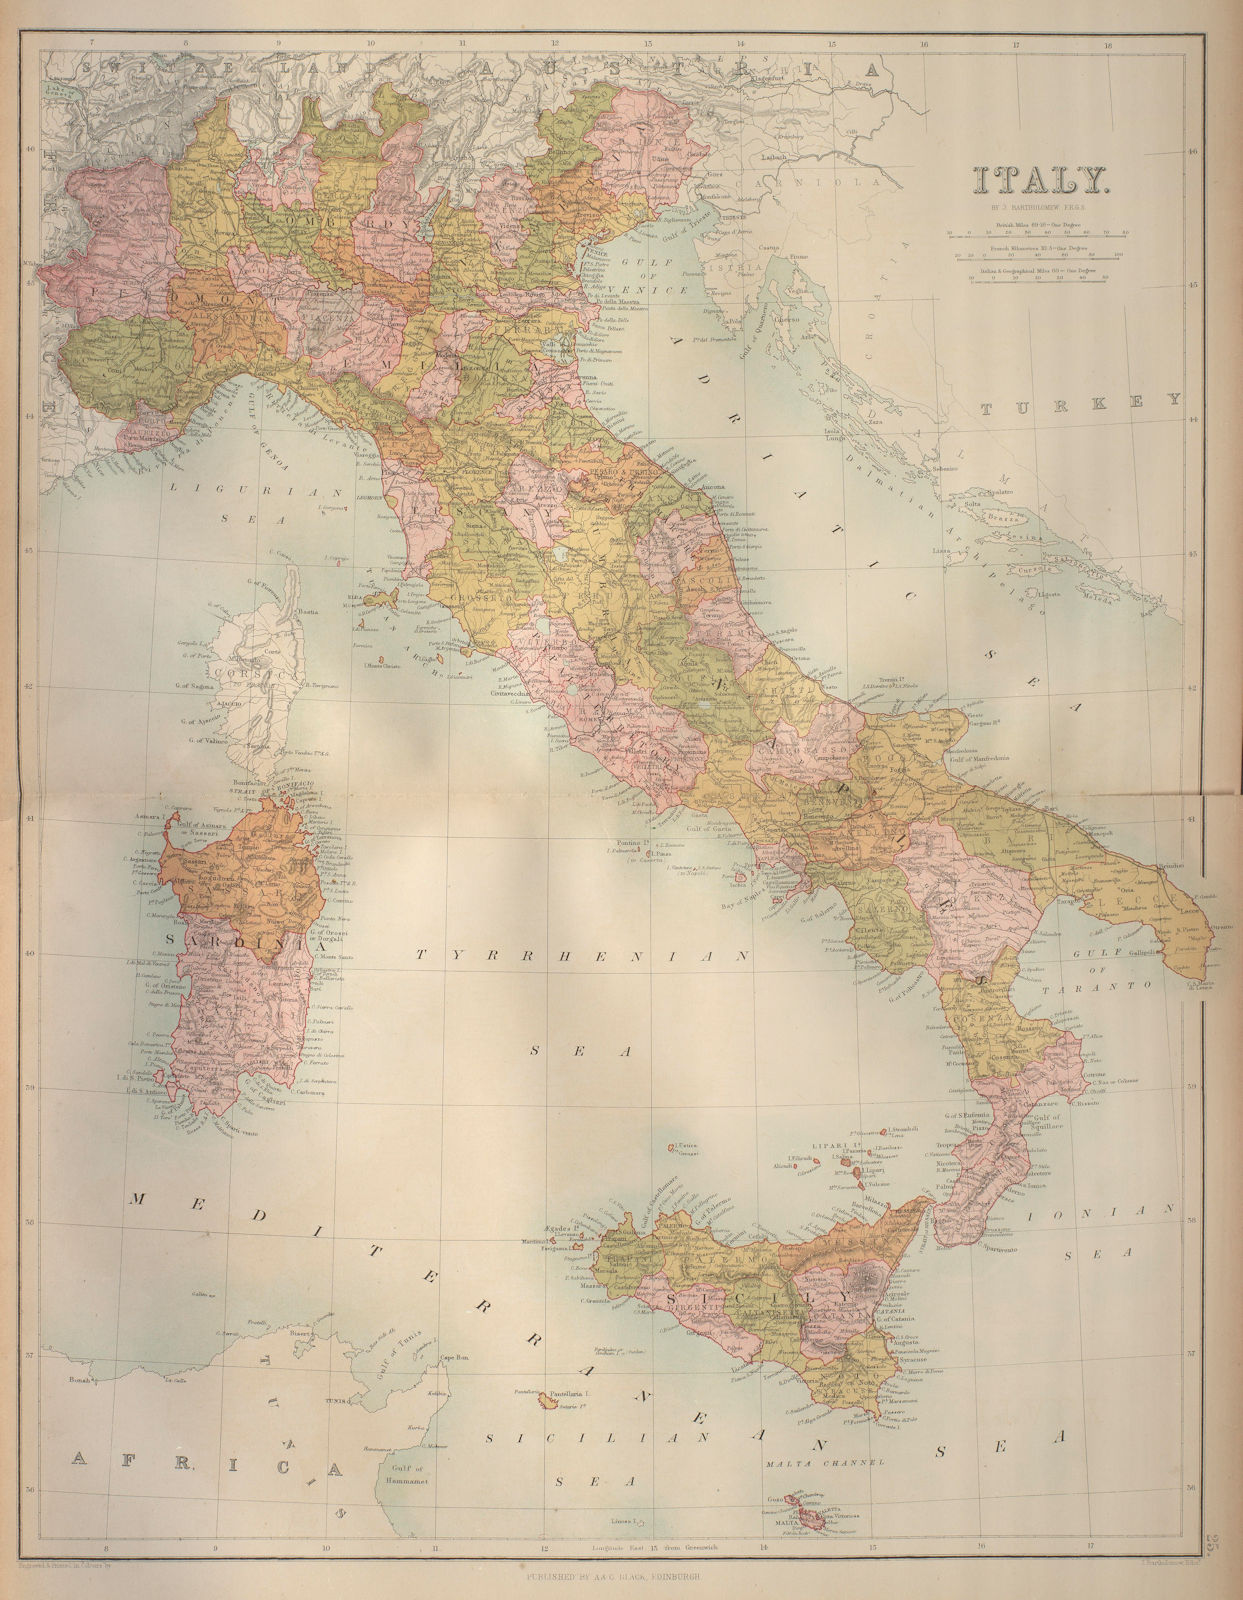 Associate Product Italy in provinces. Railways. Excl. Trieste & South Tyrol. BARTHOLOMEW 1870 map